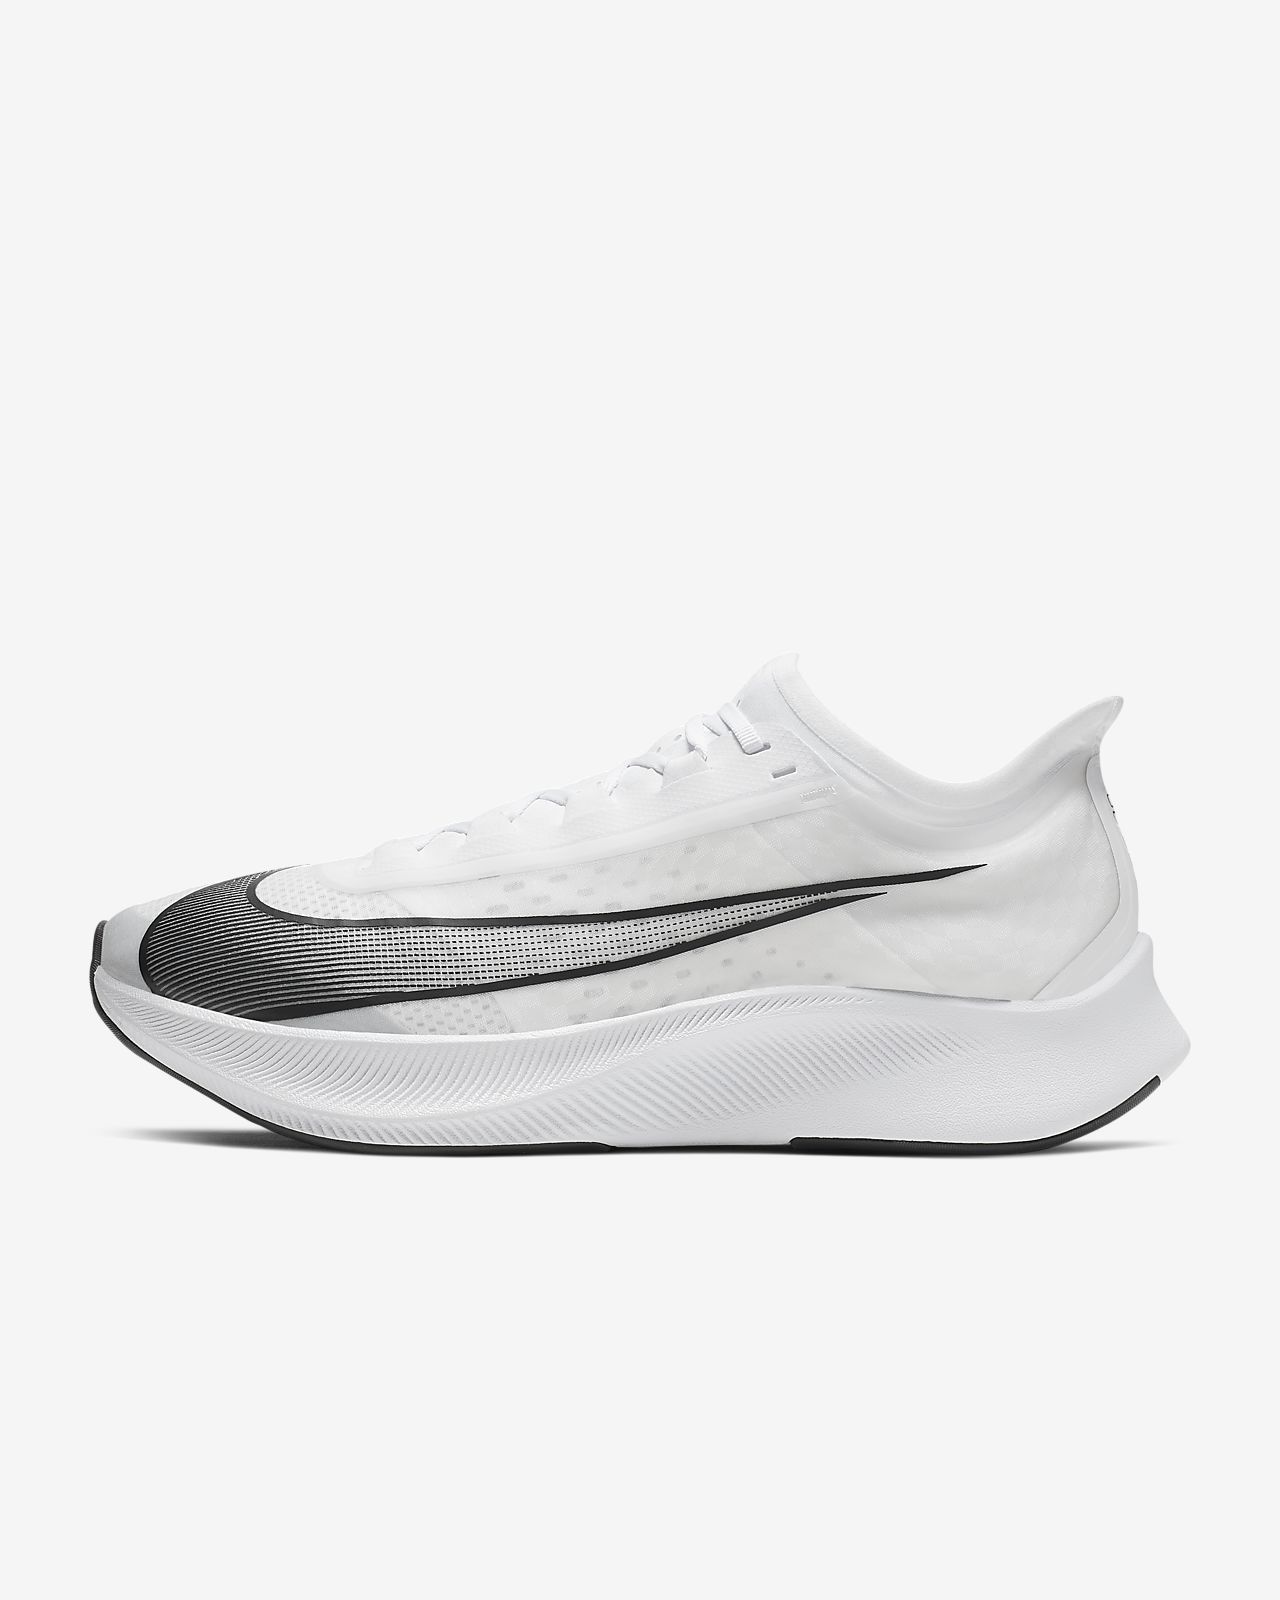 nike vaporfly homme gris